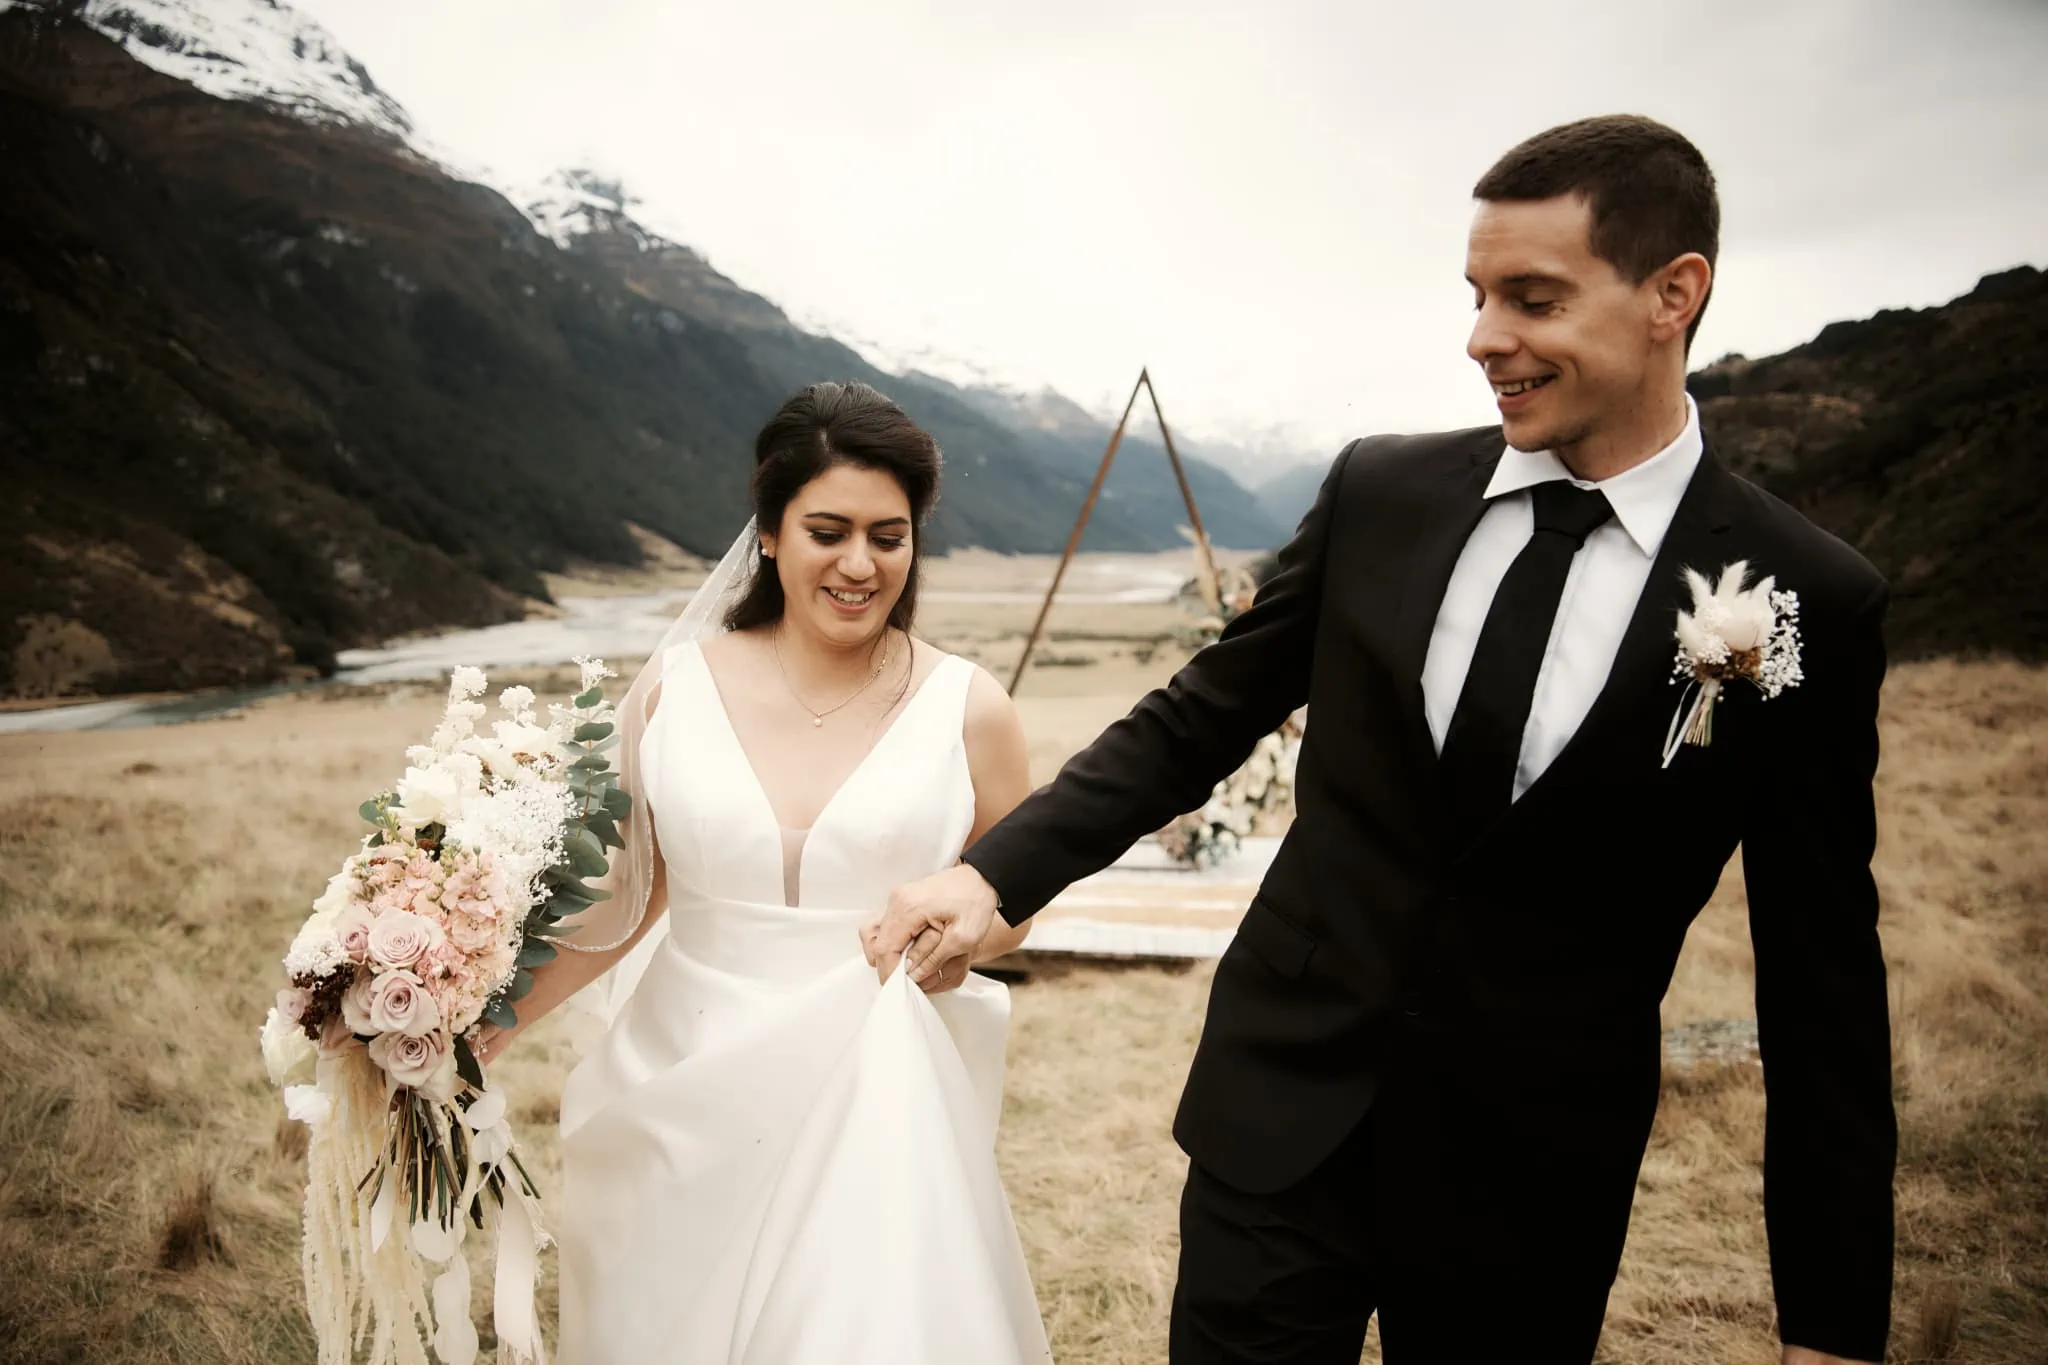 Michelle and Vedran's Rees Valley Station elopement wedding captures them walking through a field with majestic mountains in the background.